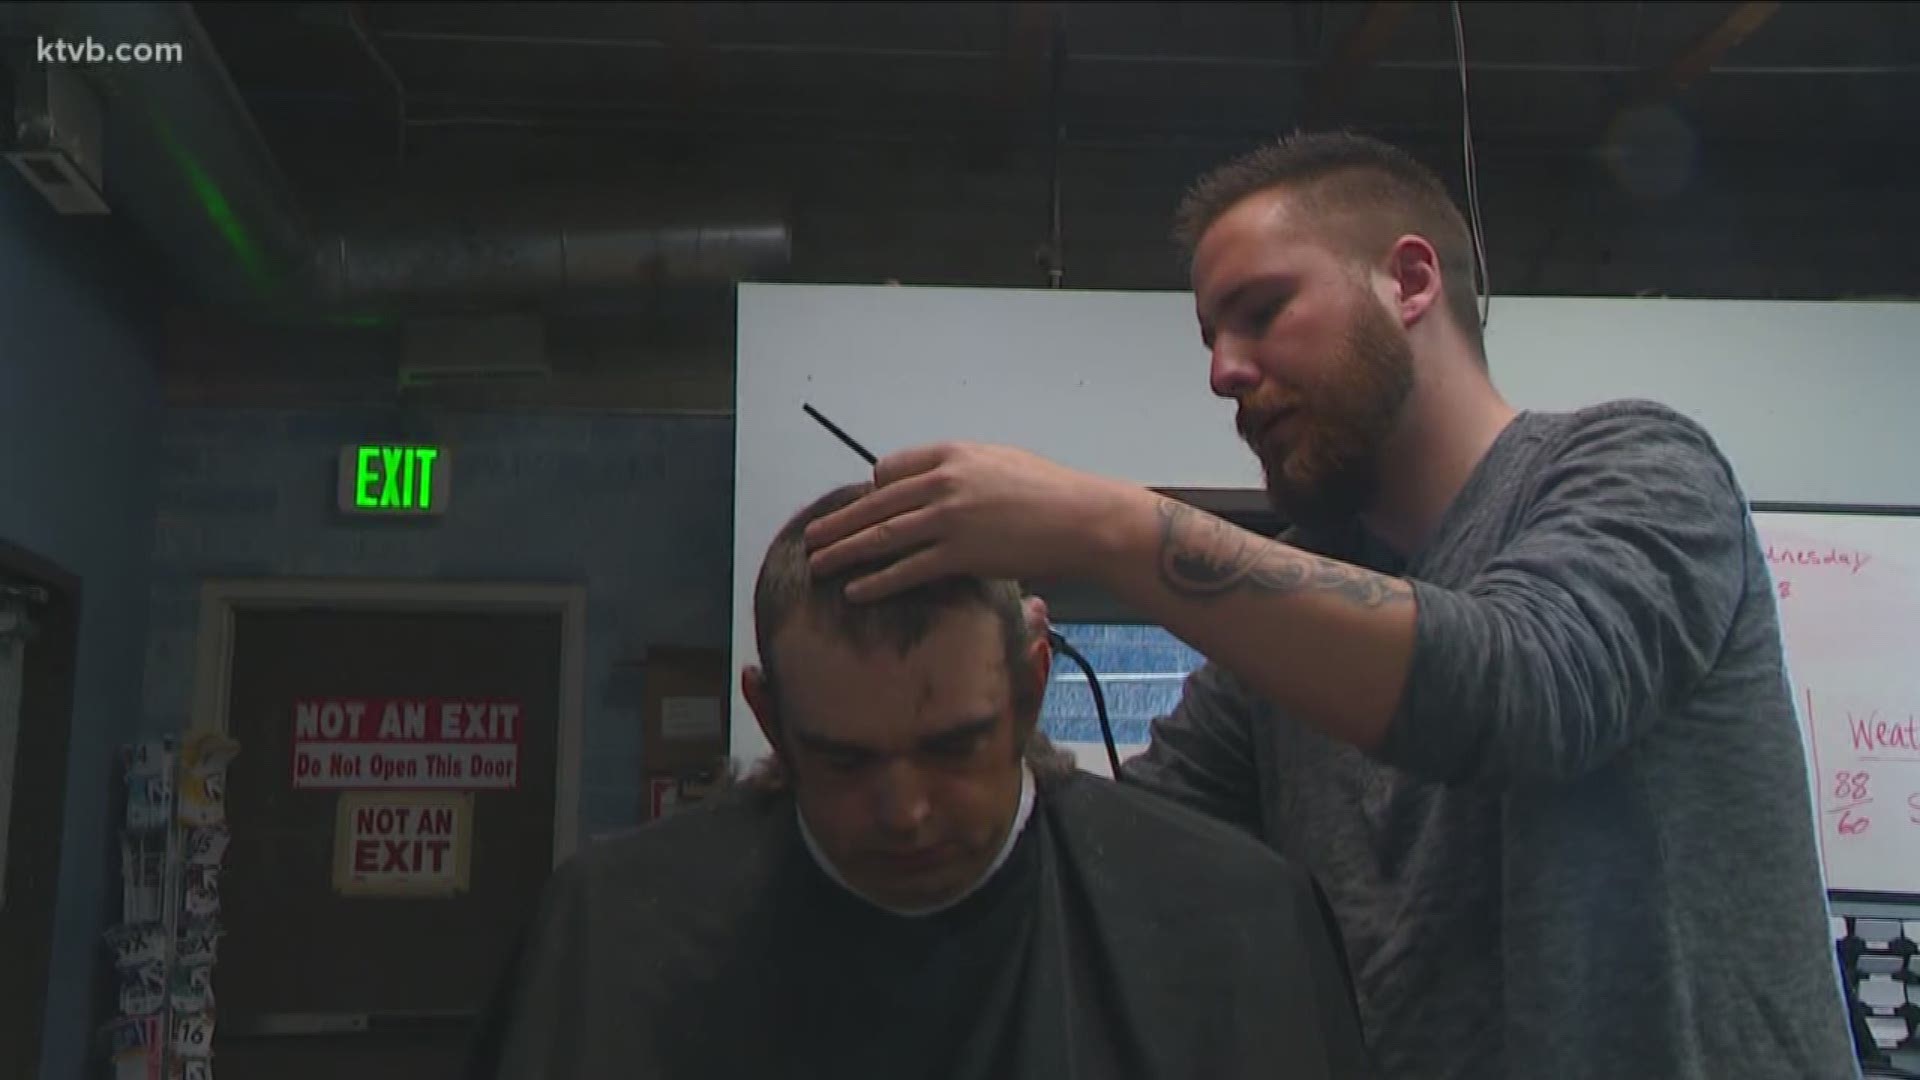 Brady Riach has been helping Boise homeless population by providing free haircuts. Now he wants to expand his reach, and help even more people.